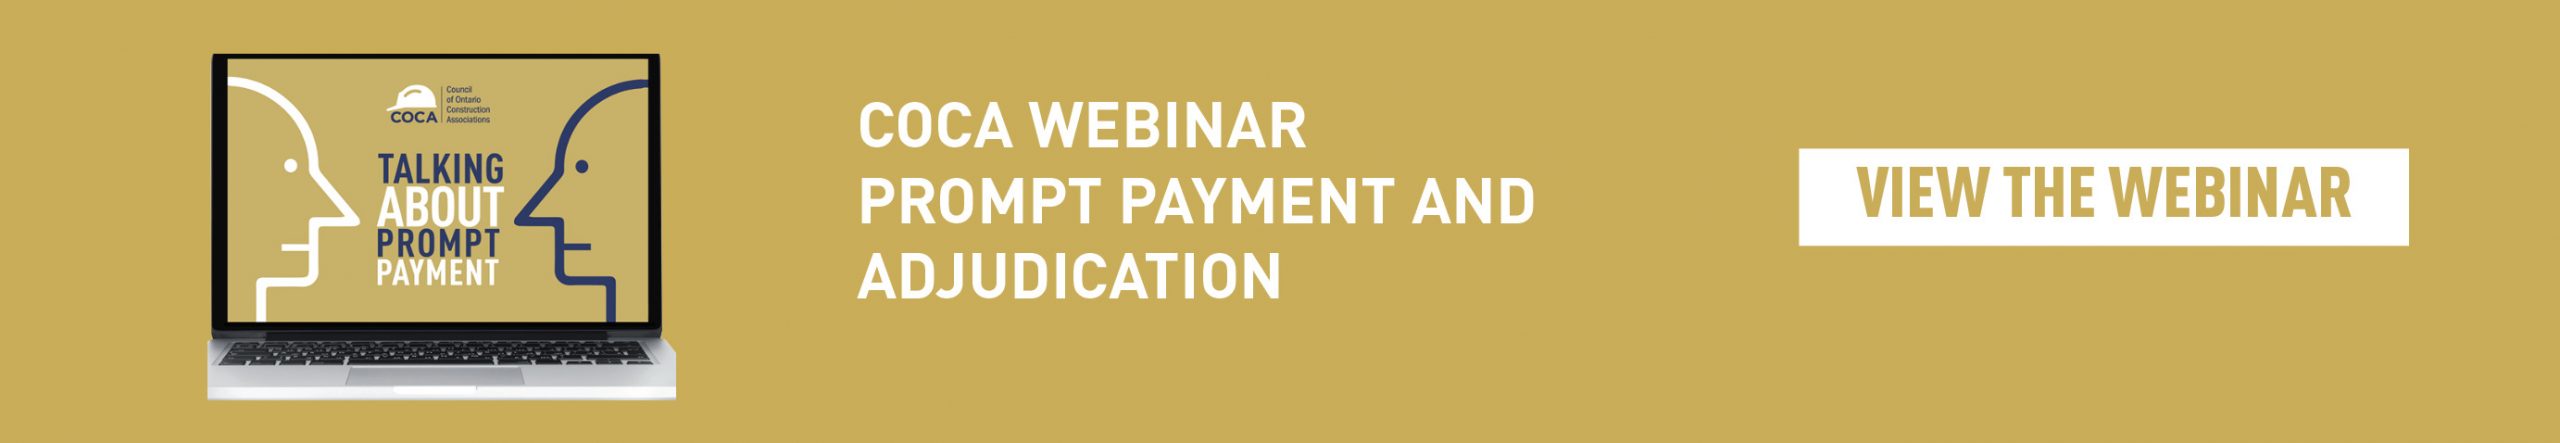 Link to Prompt Payment Webinar